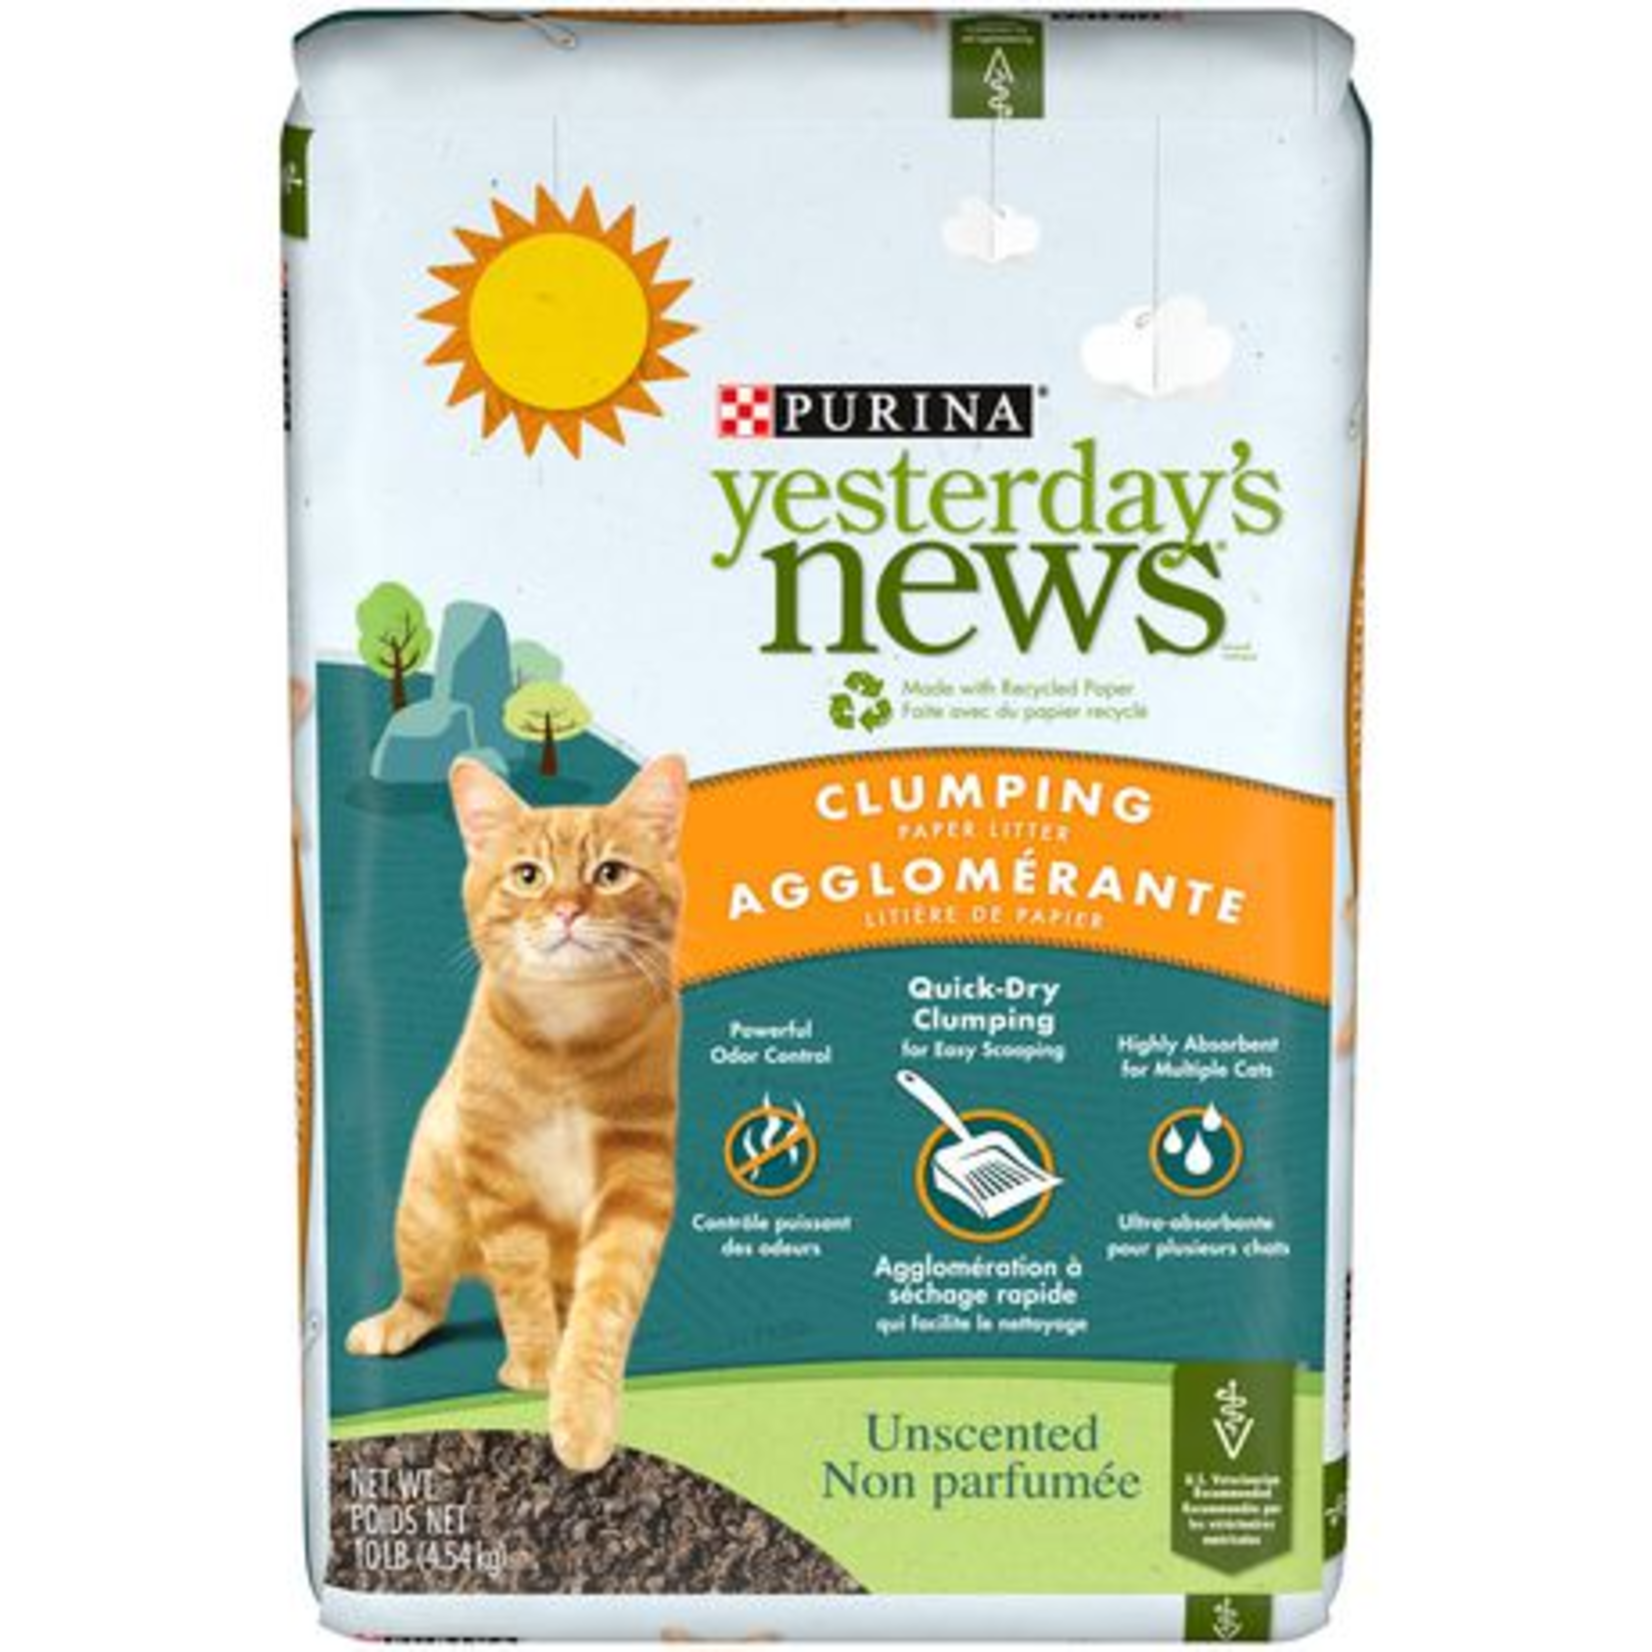 Purina Yesterday's News Clumping Litter 4.54kg / 10lb